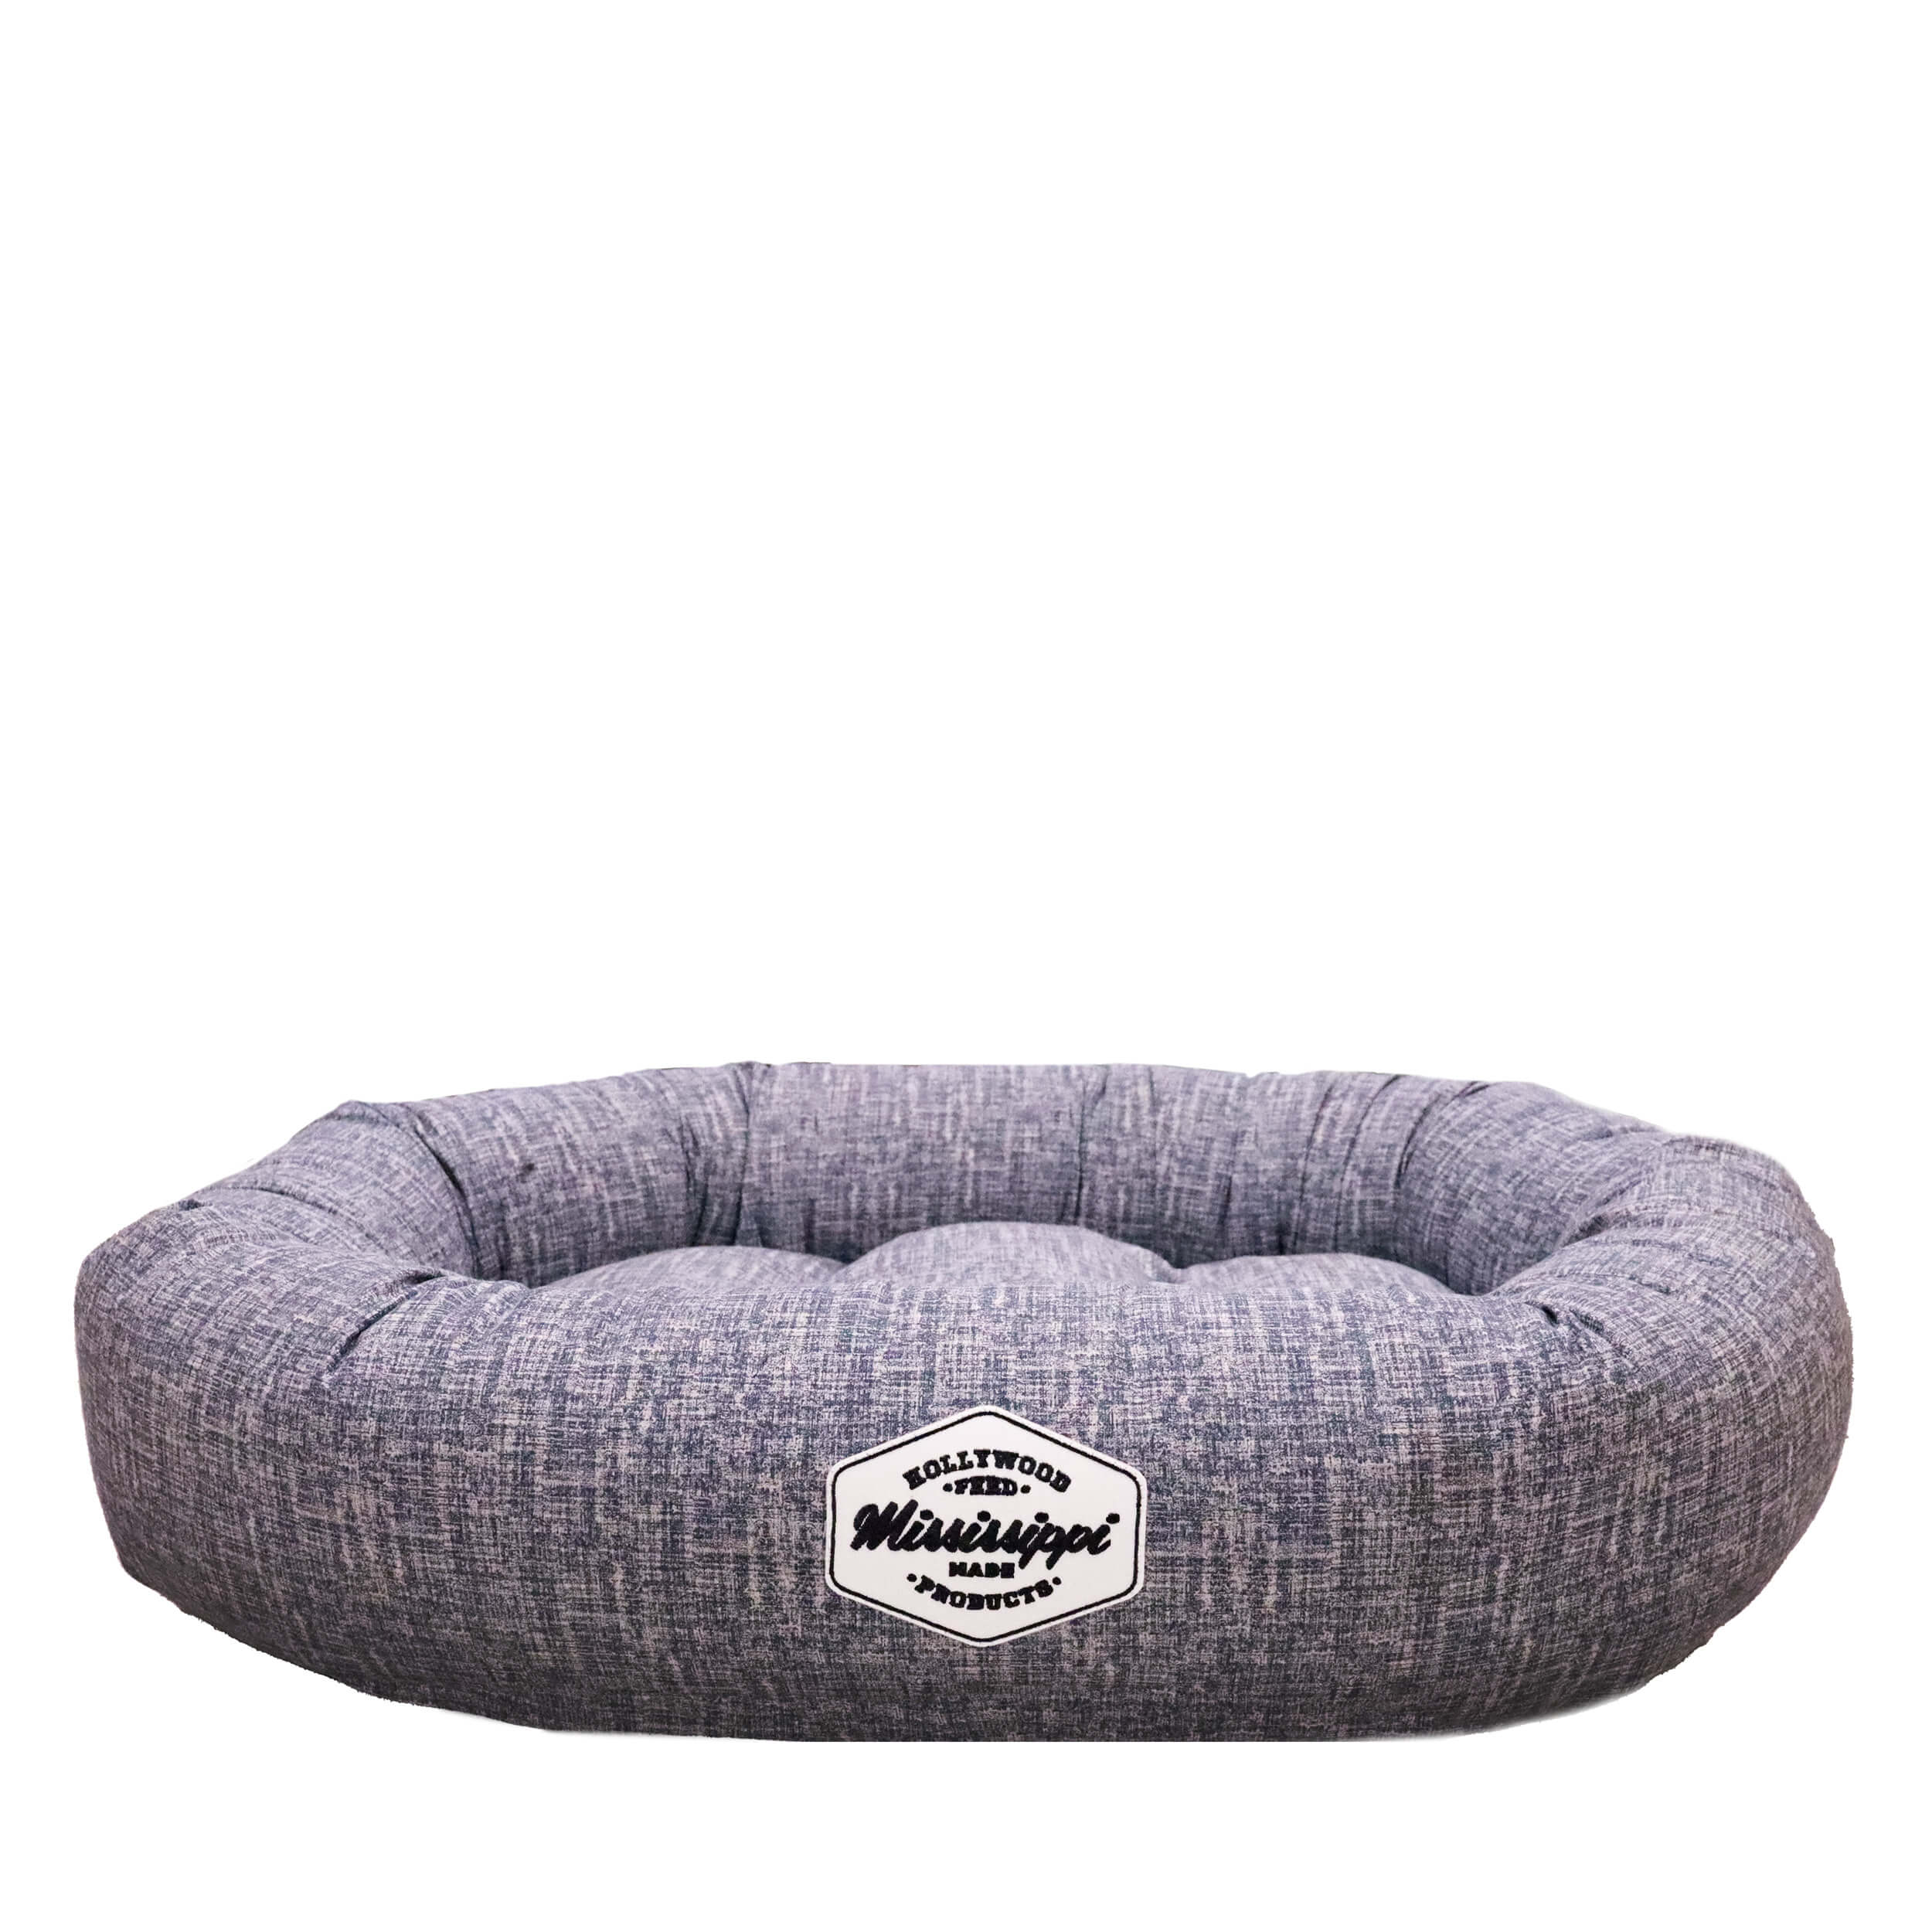 Mississippi Made blue cotton donut bed front view